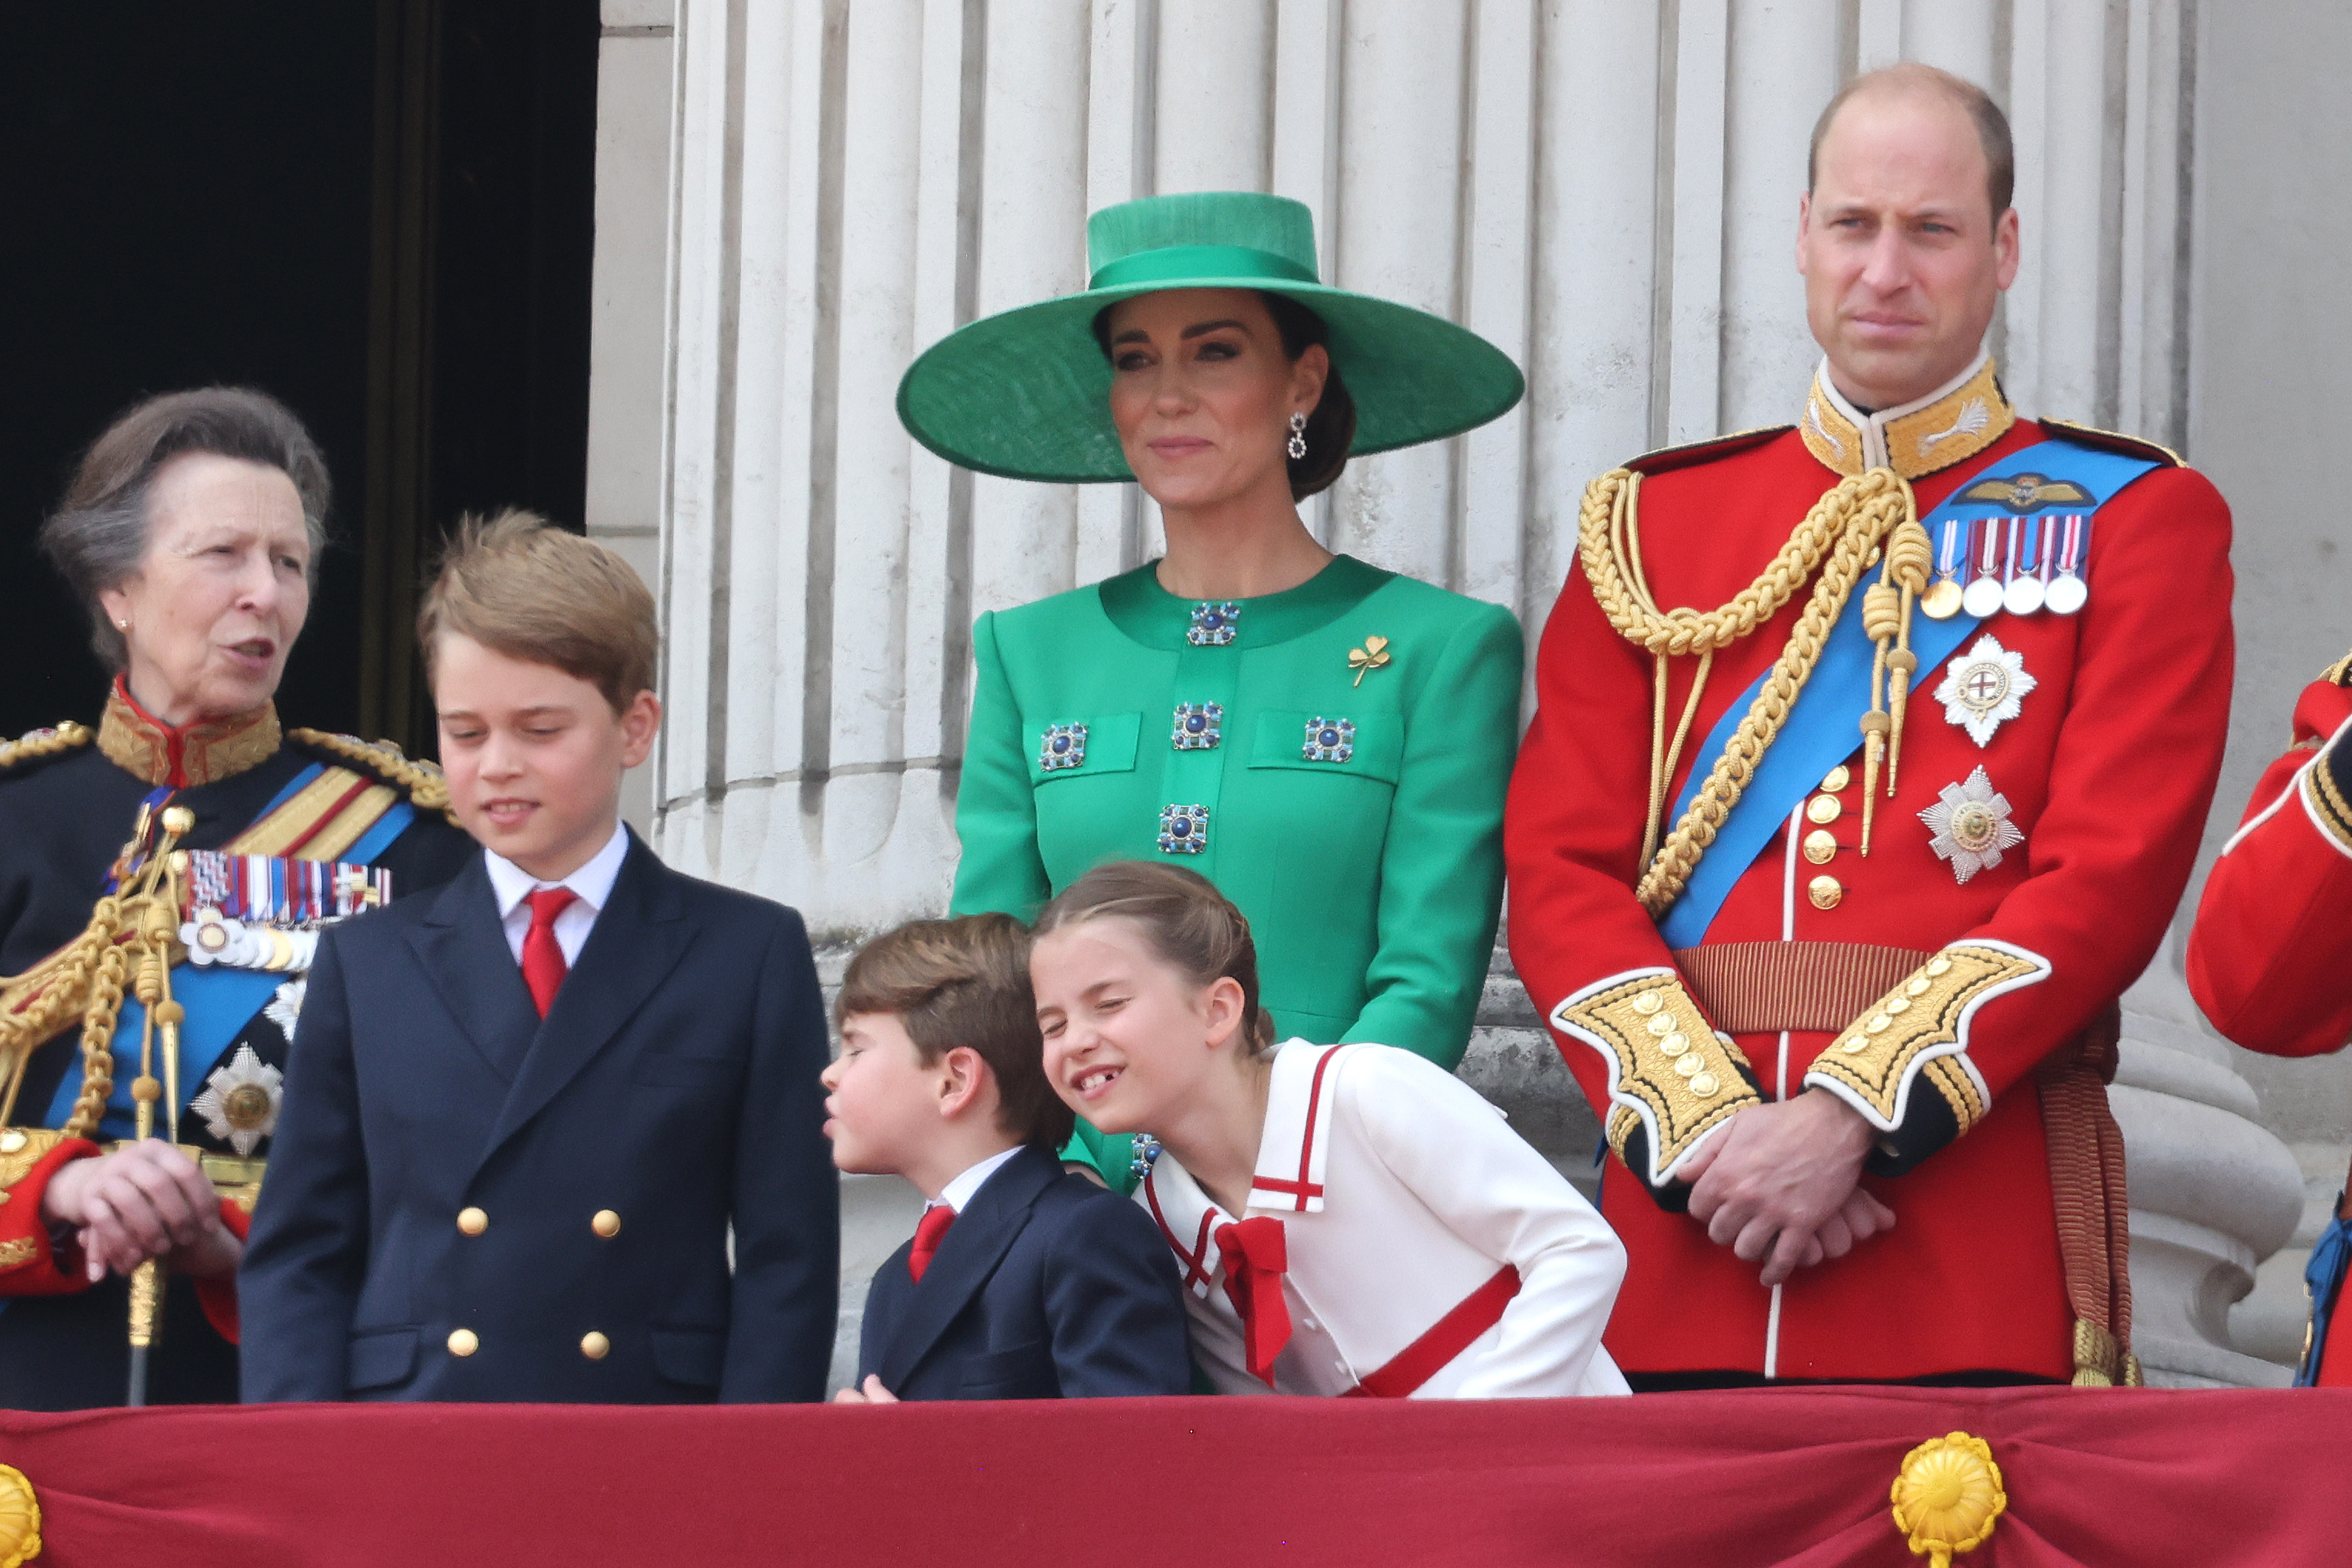 The 5 times Princess Charlotte showed she's a royal star in the making ...